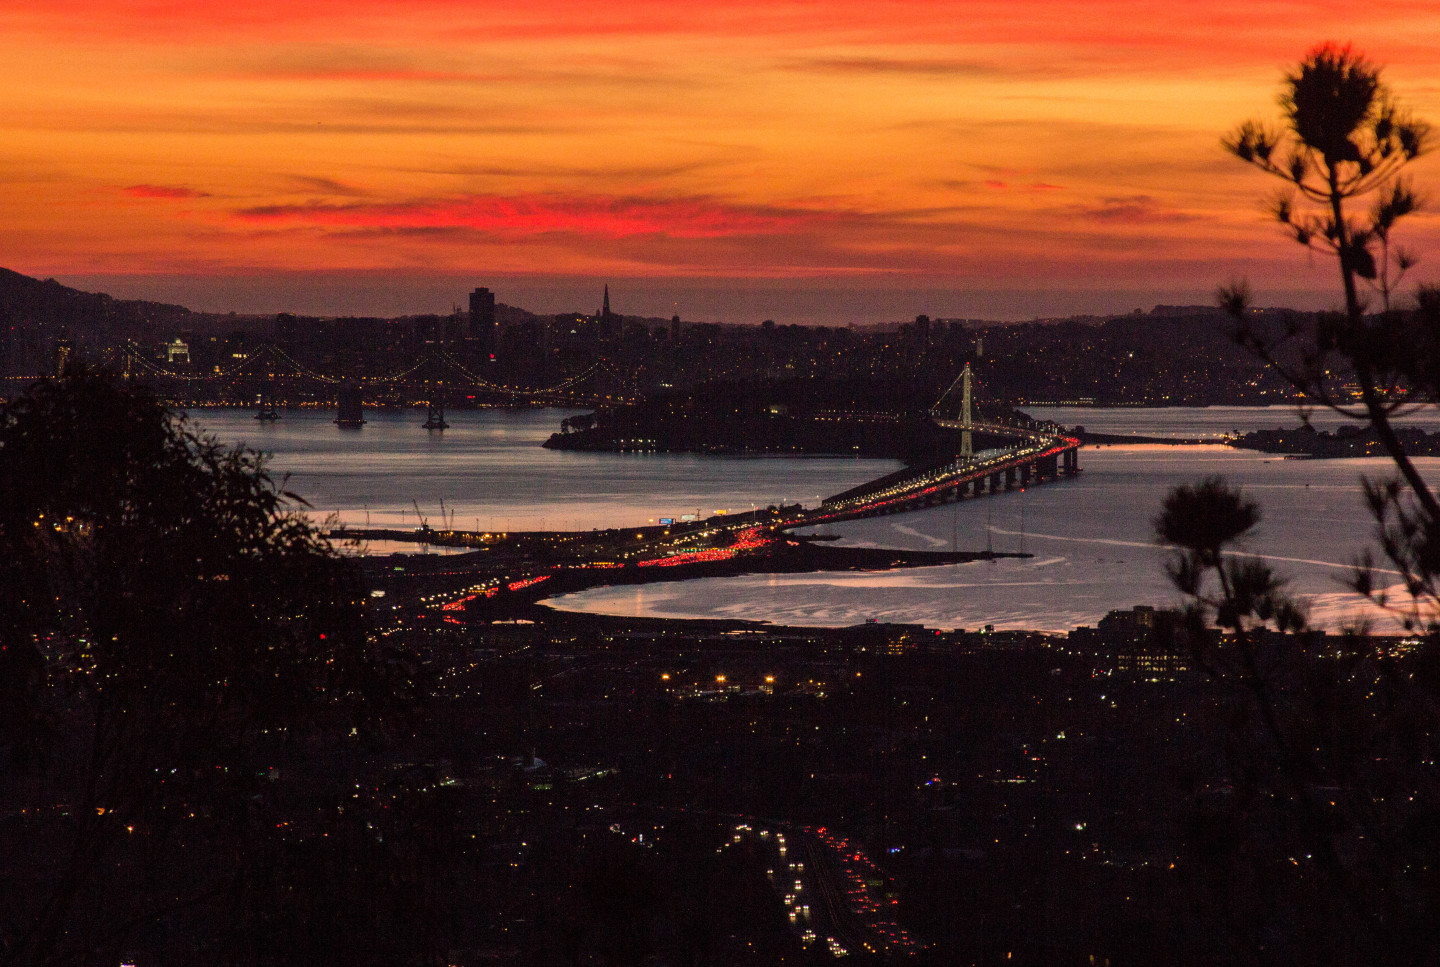 This February sunset would have happened an hour later if Daylight Saving Time had been in effect.  Dan Brekke/KQED